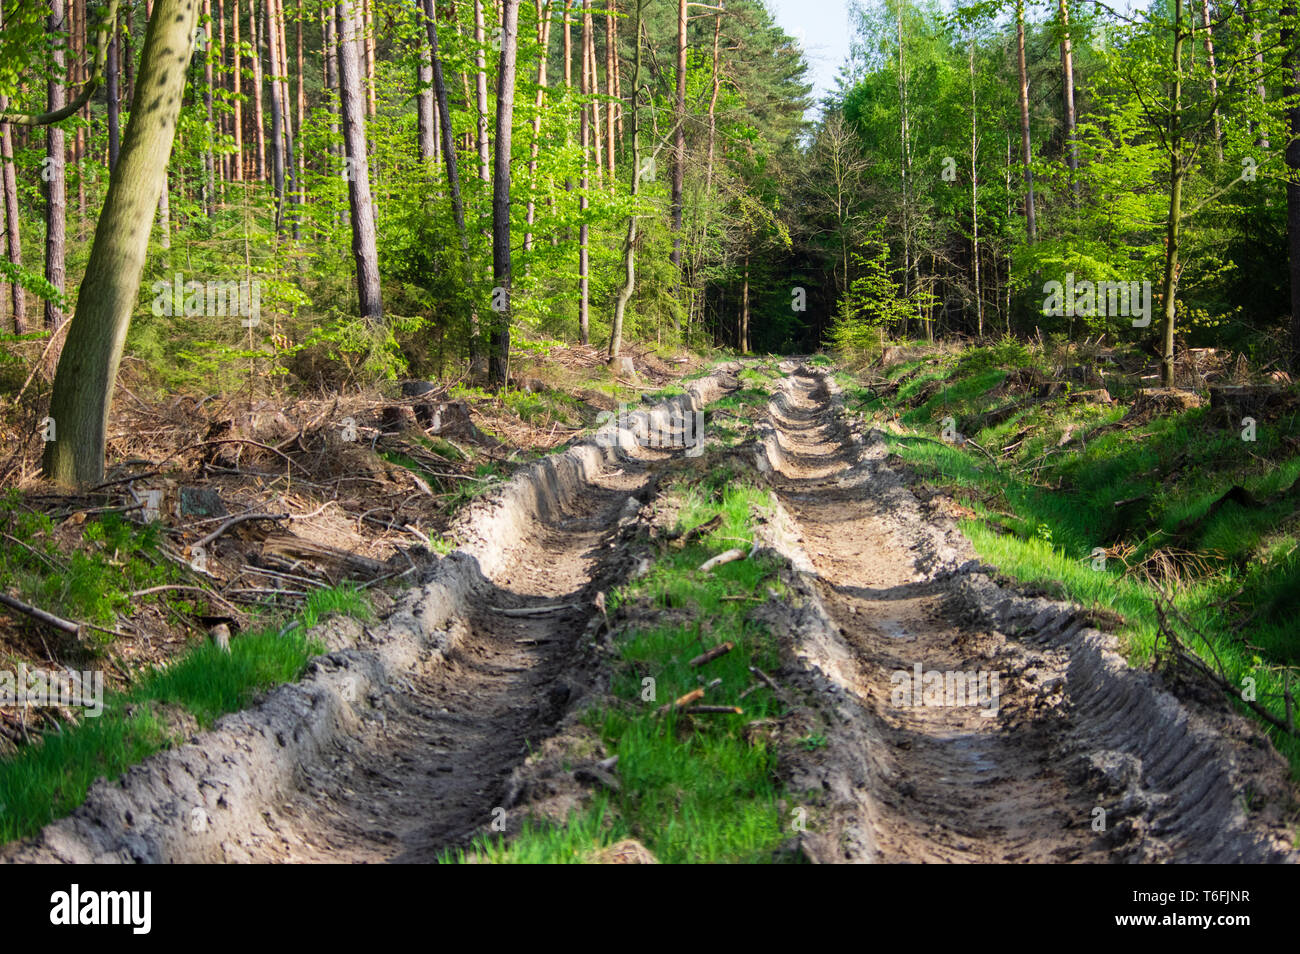 damage done to spring forest ground by a harvester machine Stock Photo